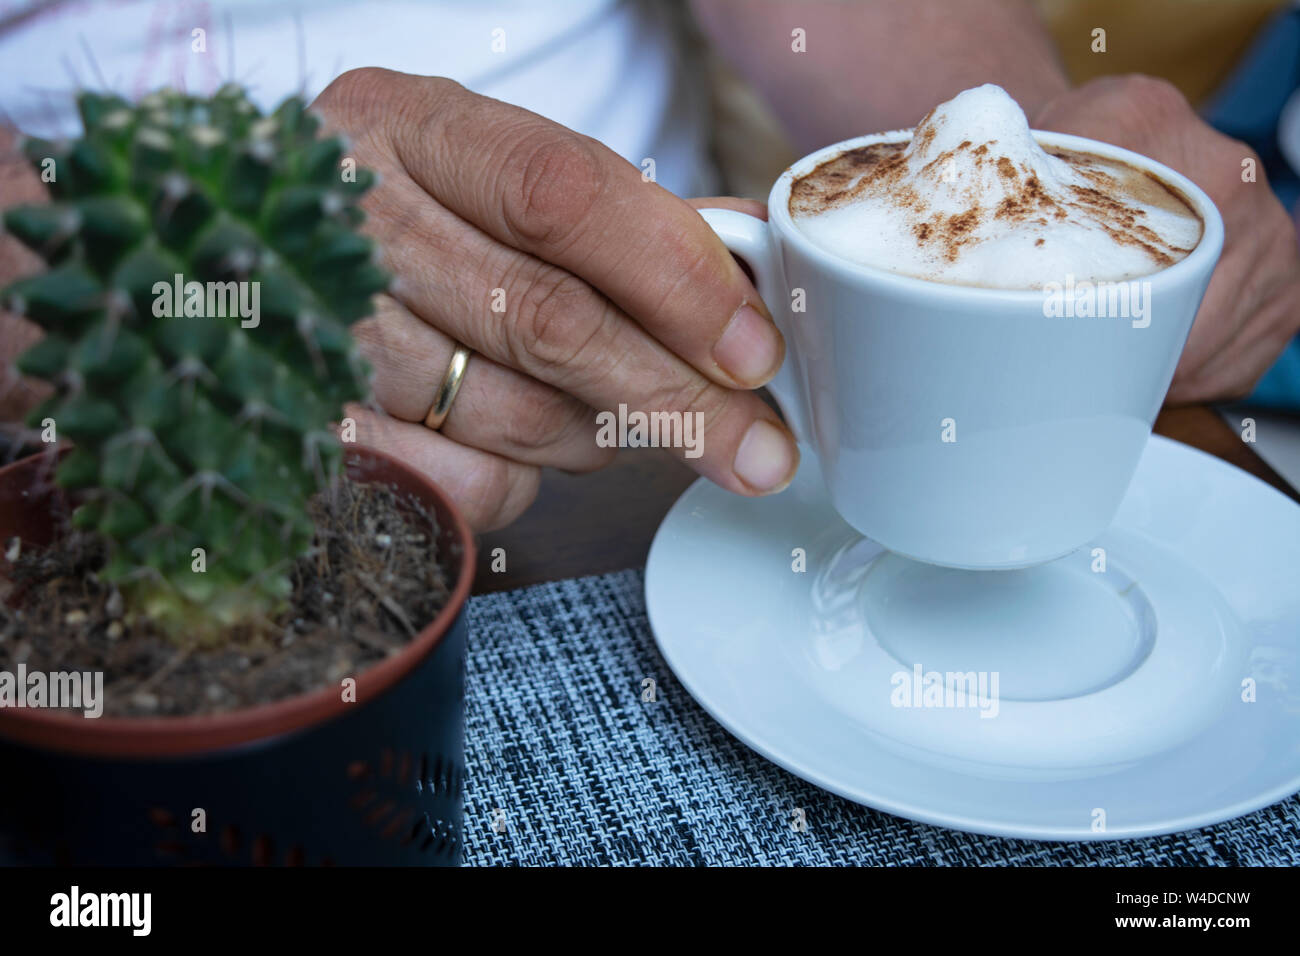 Close up of a man's hand holding a cup of warm cappuccino. At a coffee shop, doing his morning routine. With a wedding ring on his finger. Stock Photo